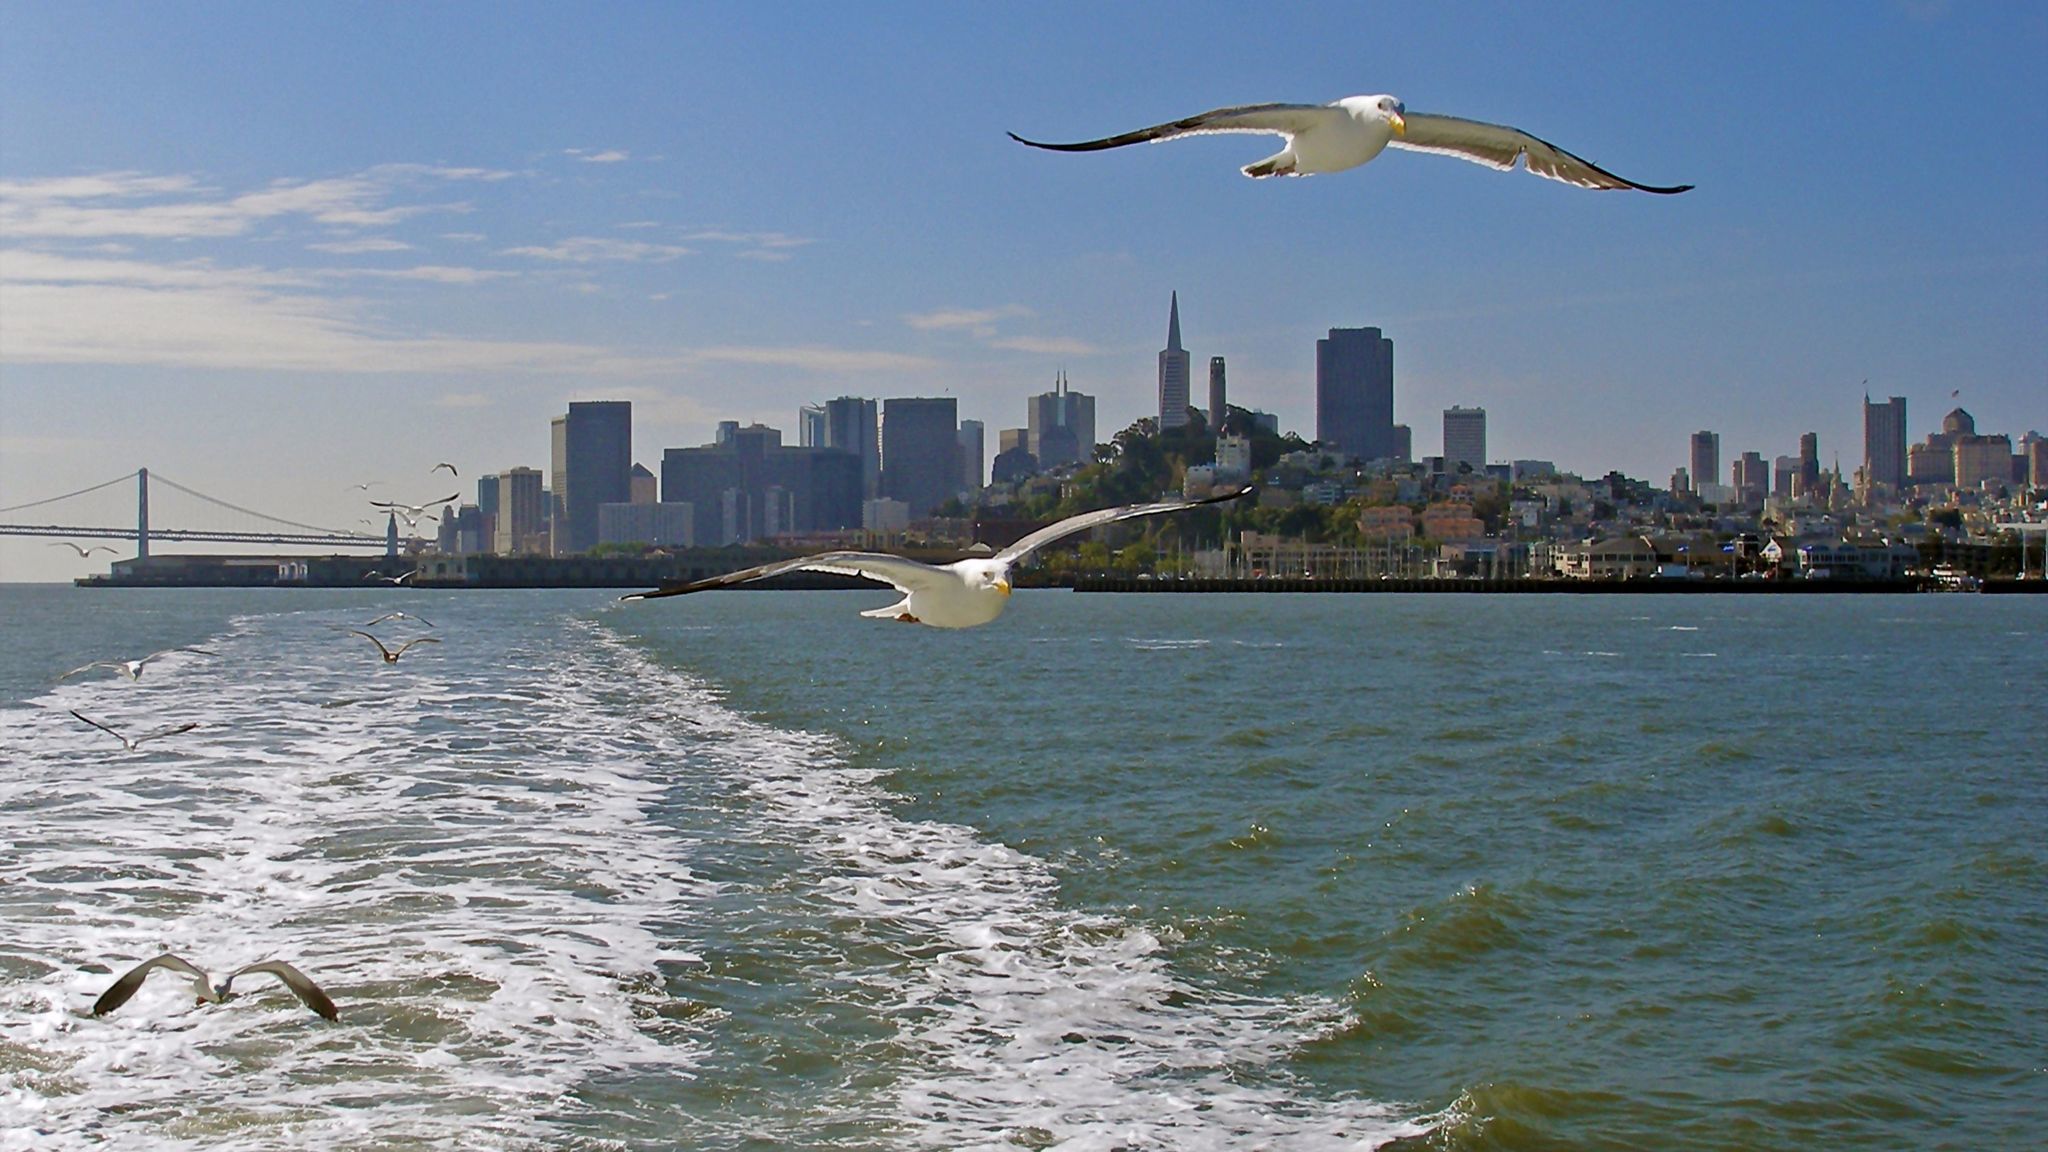 Keep your cool and get cool views of San Francisco on a ferry ride.